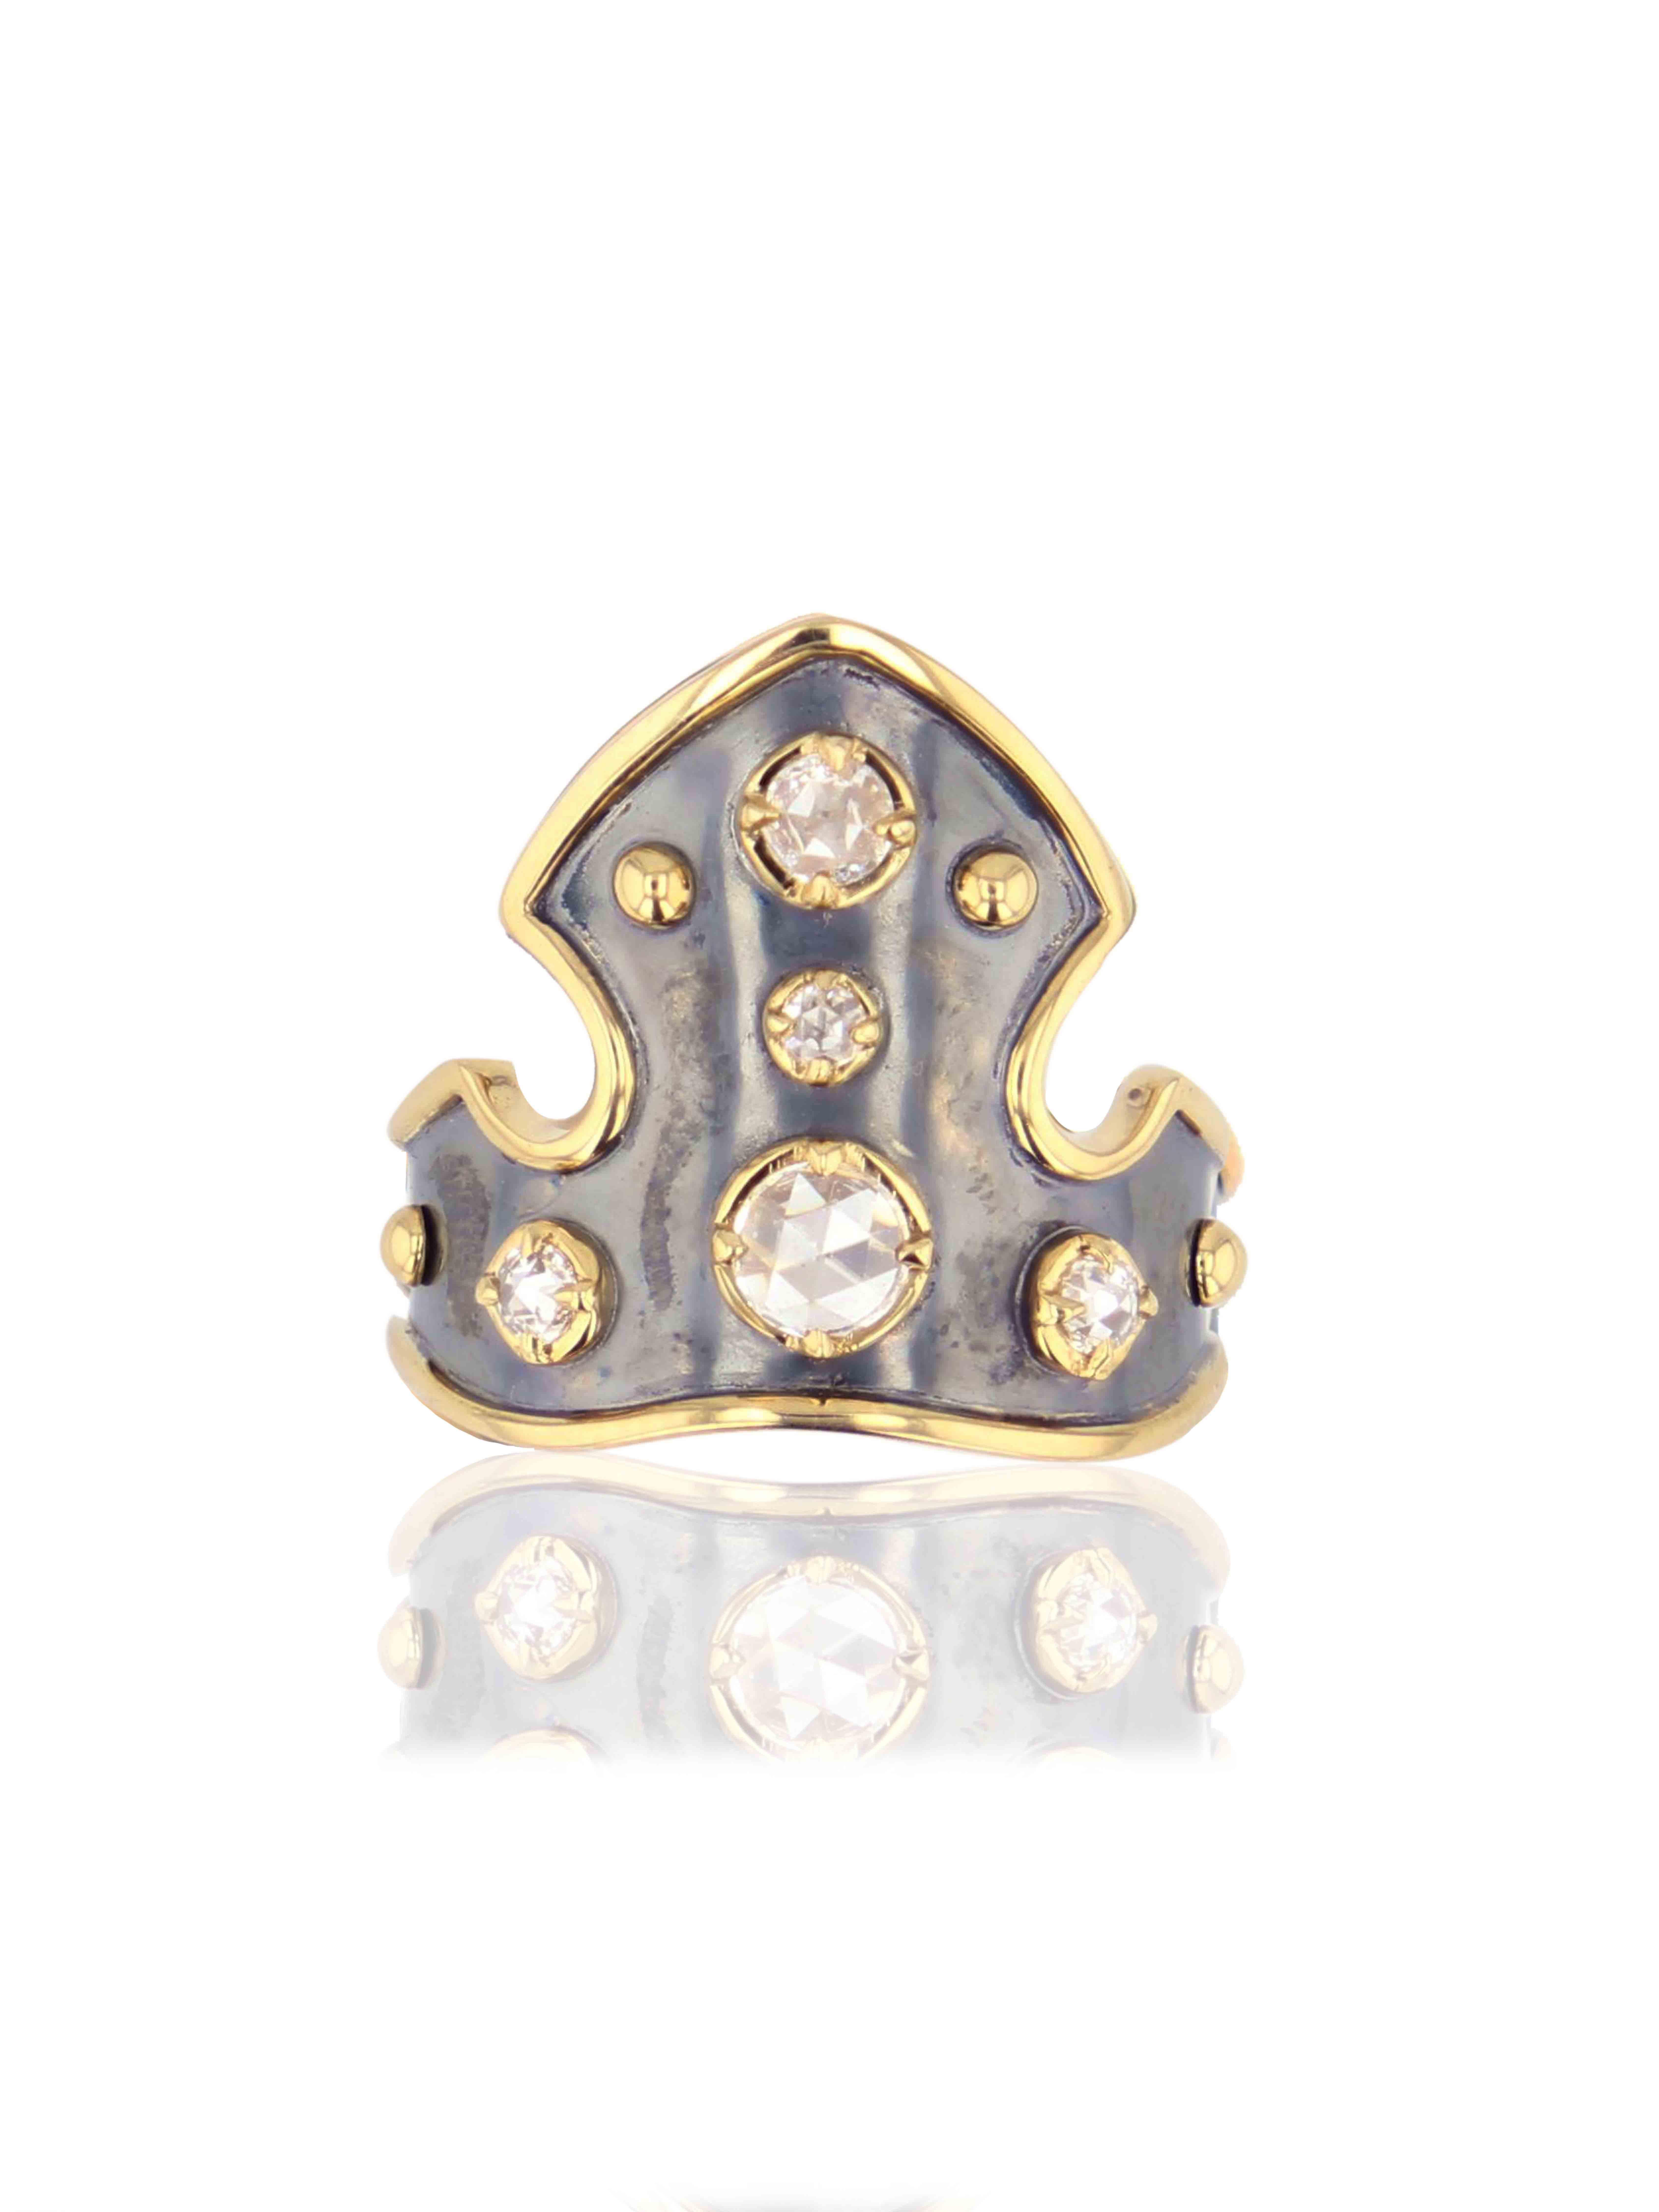 Patined silver blazon-shaped ring rail whose contours and claws are in yellow gold. It is set with with 5 diamonds and 7 yellow gold spikes. Inside the ring is a polished silver floral pattern in relief.

Corps de bague en forme de blason en argent